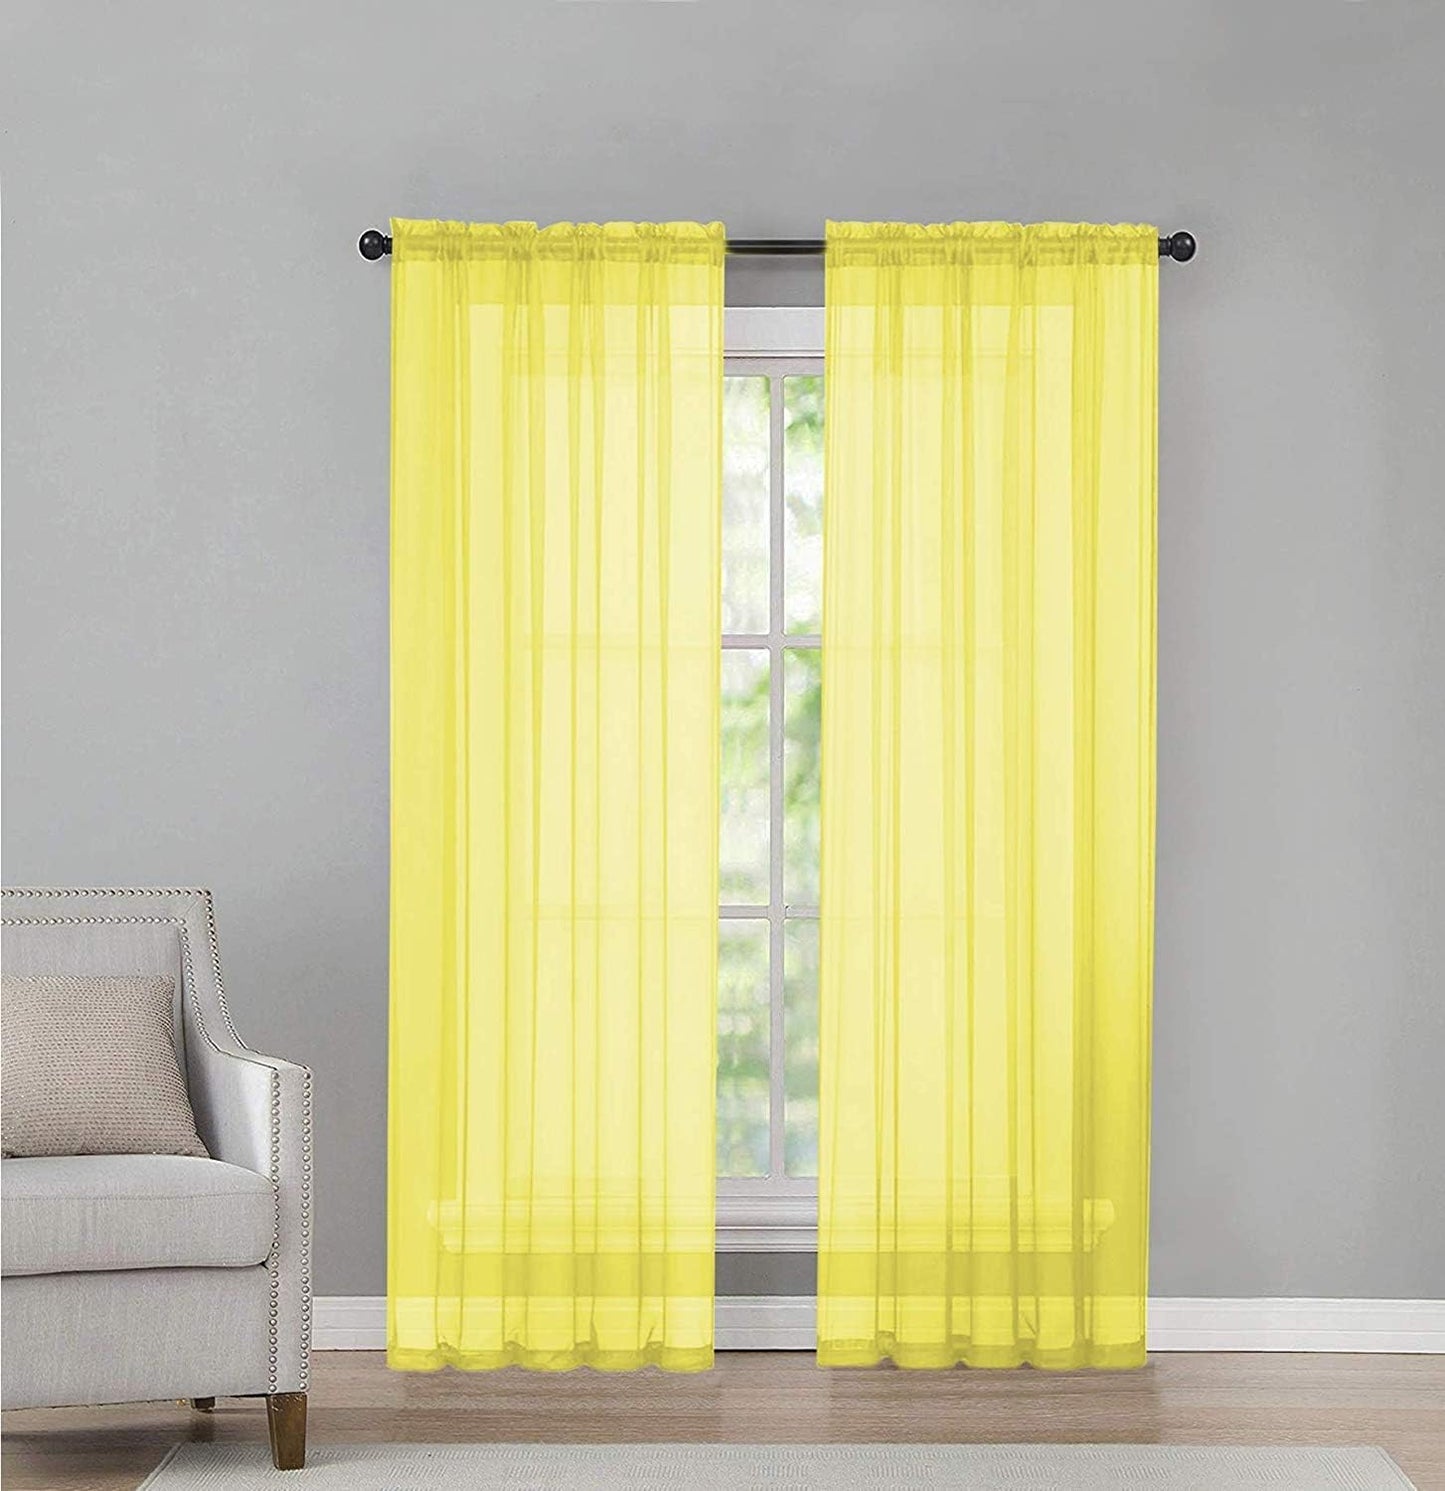 Goodgram 2 Pack: Basic Rod Pocket Sheer Voile Window Curtain Panels - Assorted Colors (White, 84 In. Long)  Goodgram Yellow Contemporary 95 In. Long